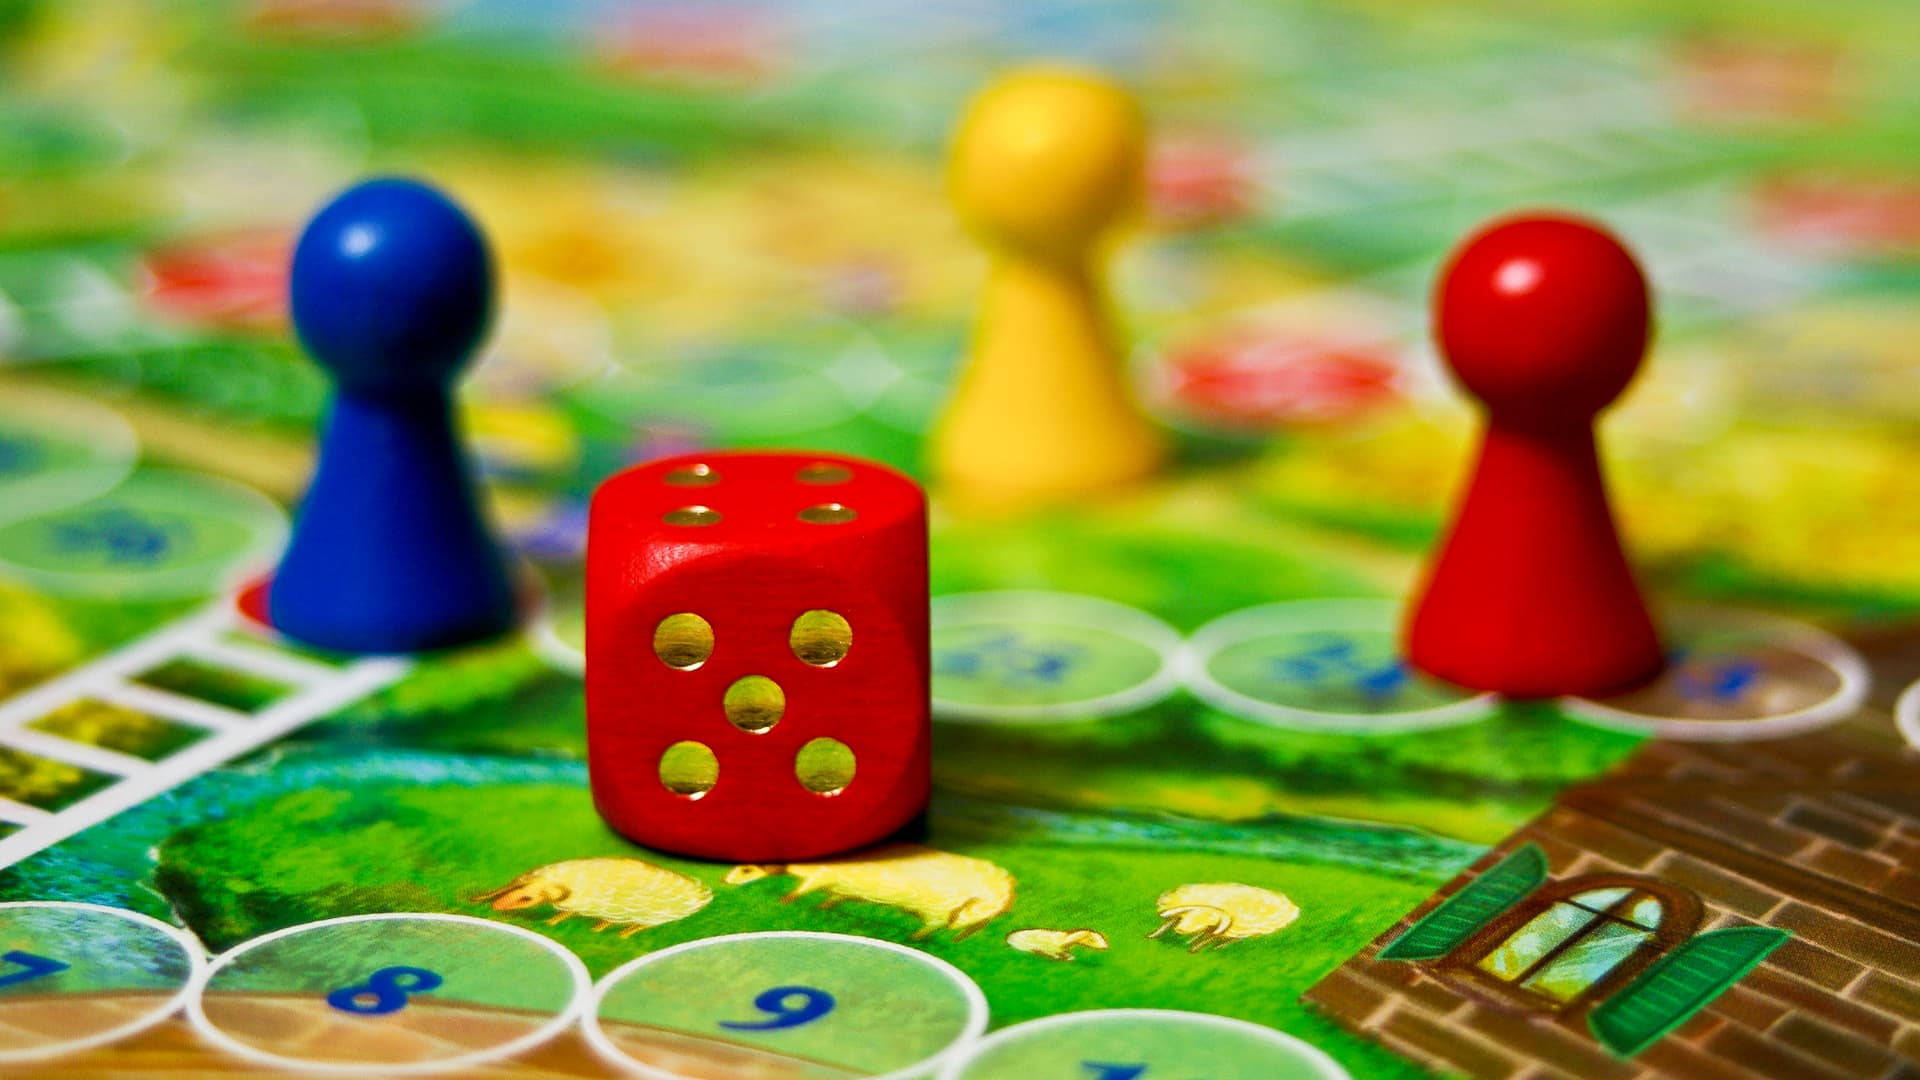 THE GAME OF LIFE: 2016 Edition, board game, mobile app, Facebook